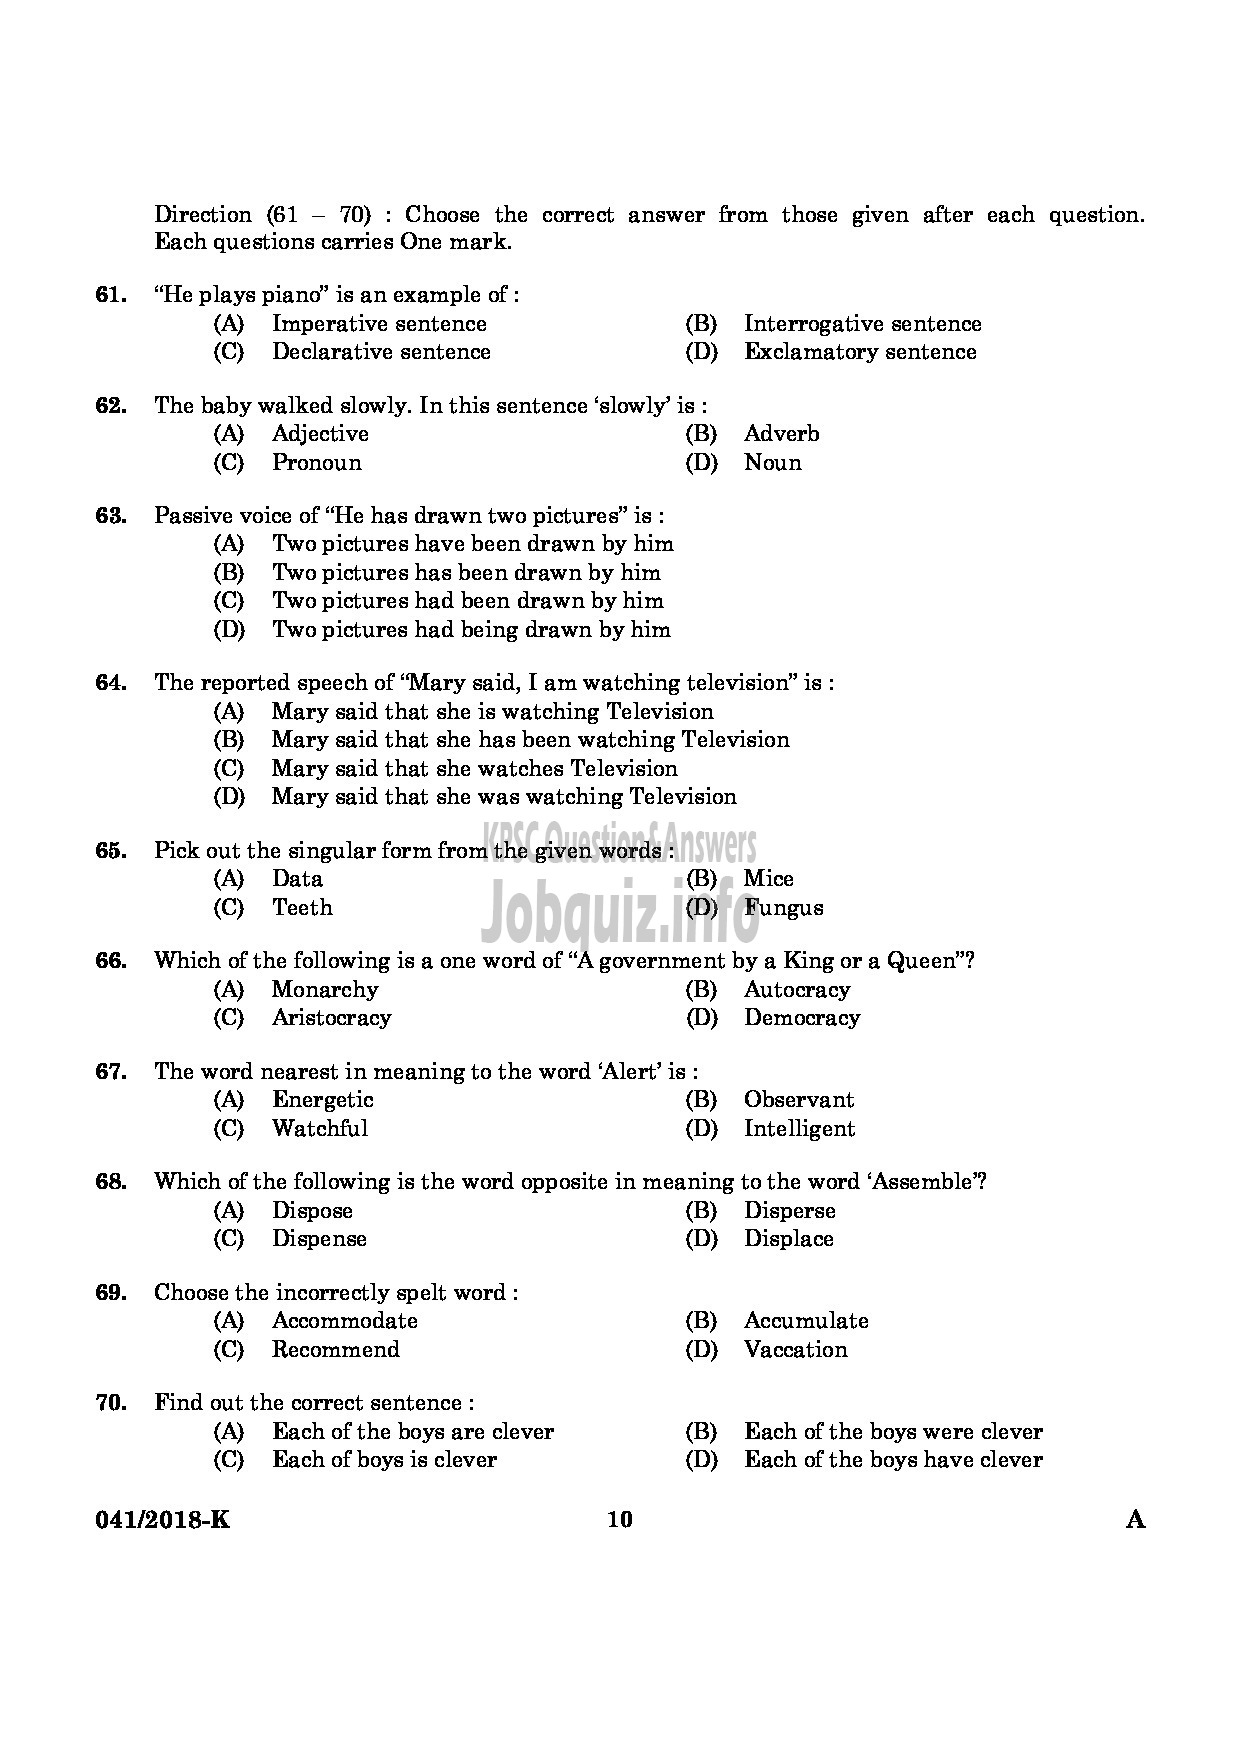 Kerala PSC Question Paper - WOMEN POLICE CONSTABLE NCA LC/AI AND MUSLIM POLICE KANNADA-8